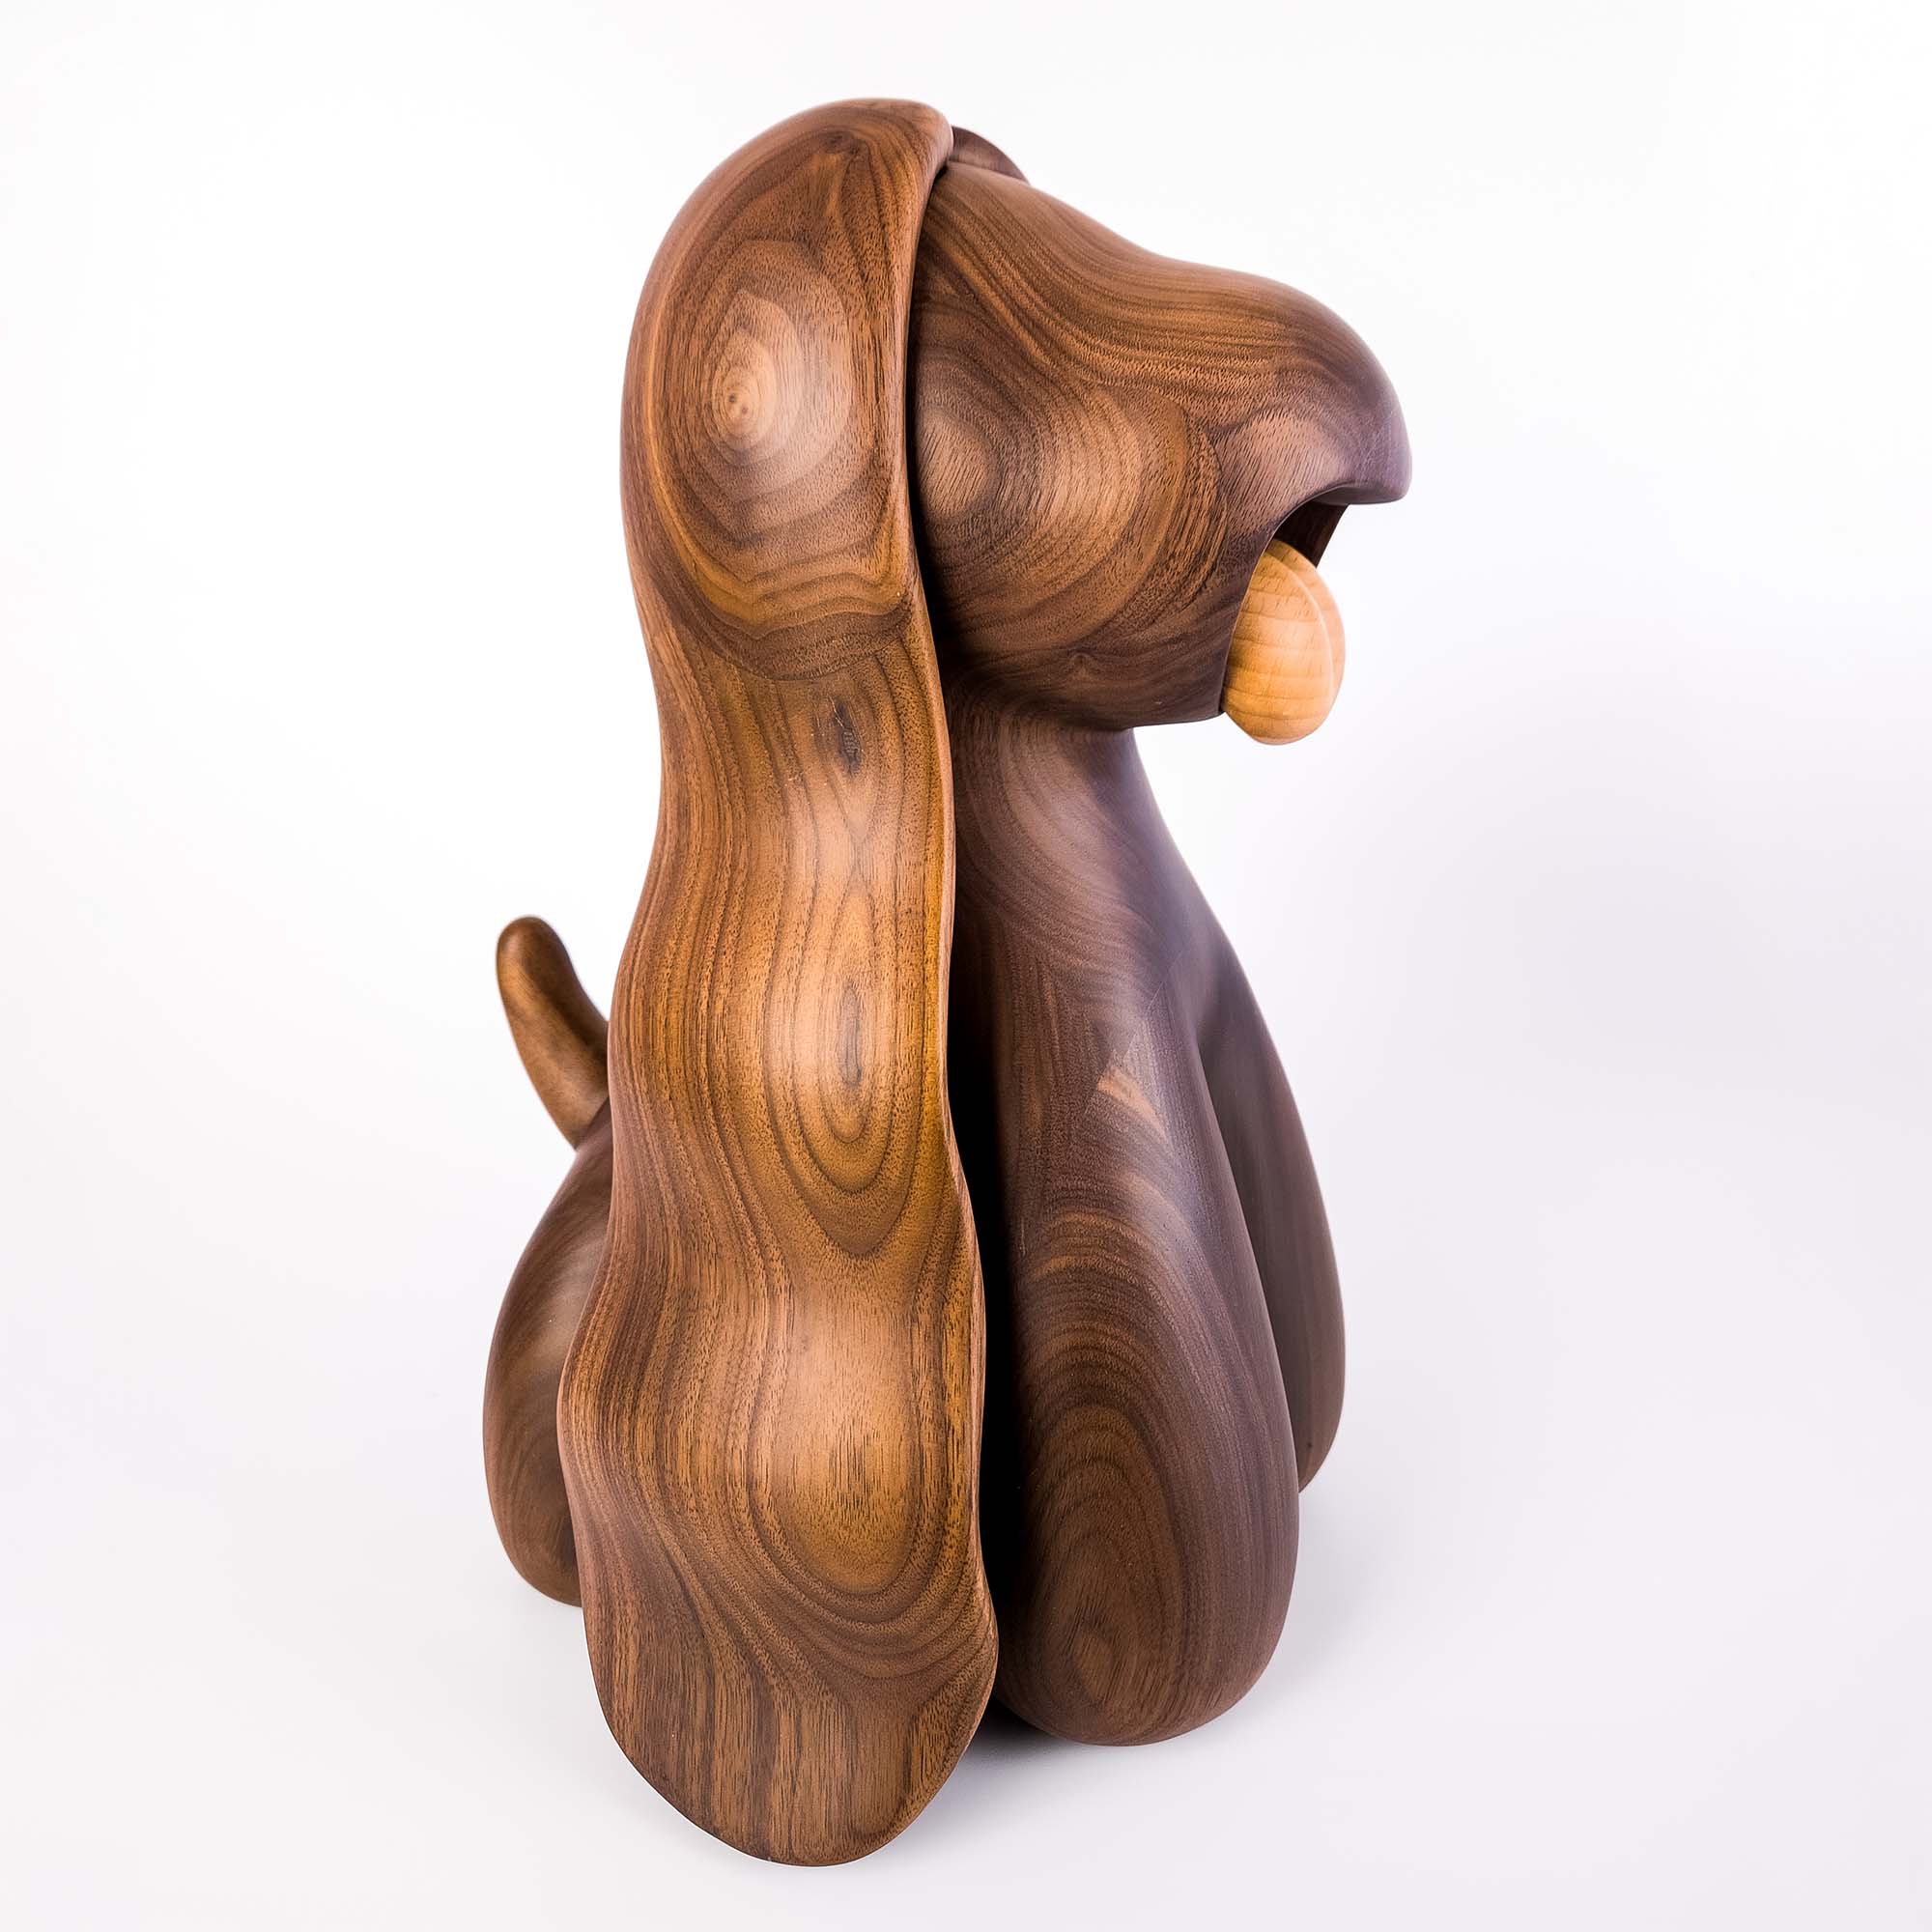 Mona Dog (Walnut and Beech  Wood) 5, Limited edition, designed by Ferdi B Dick, side 45 view